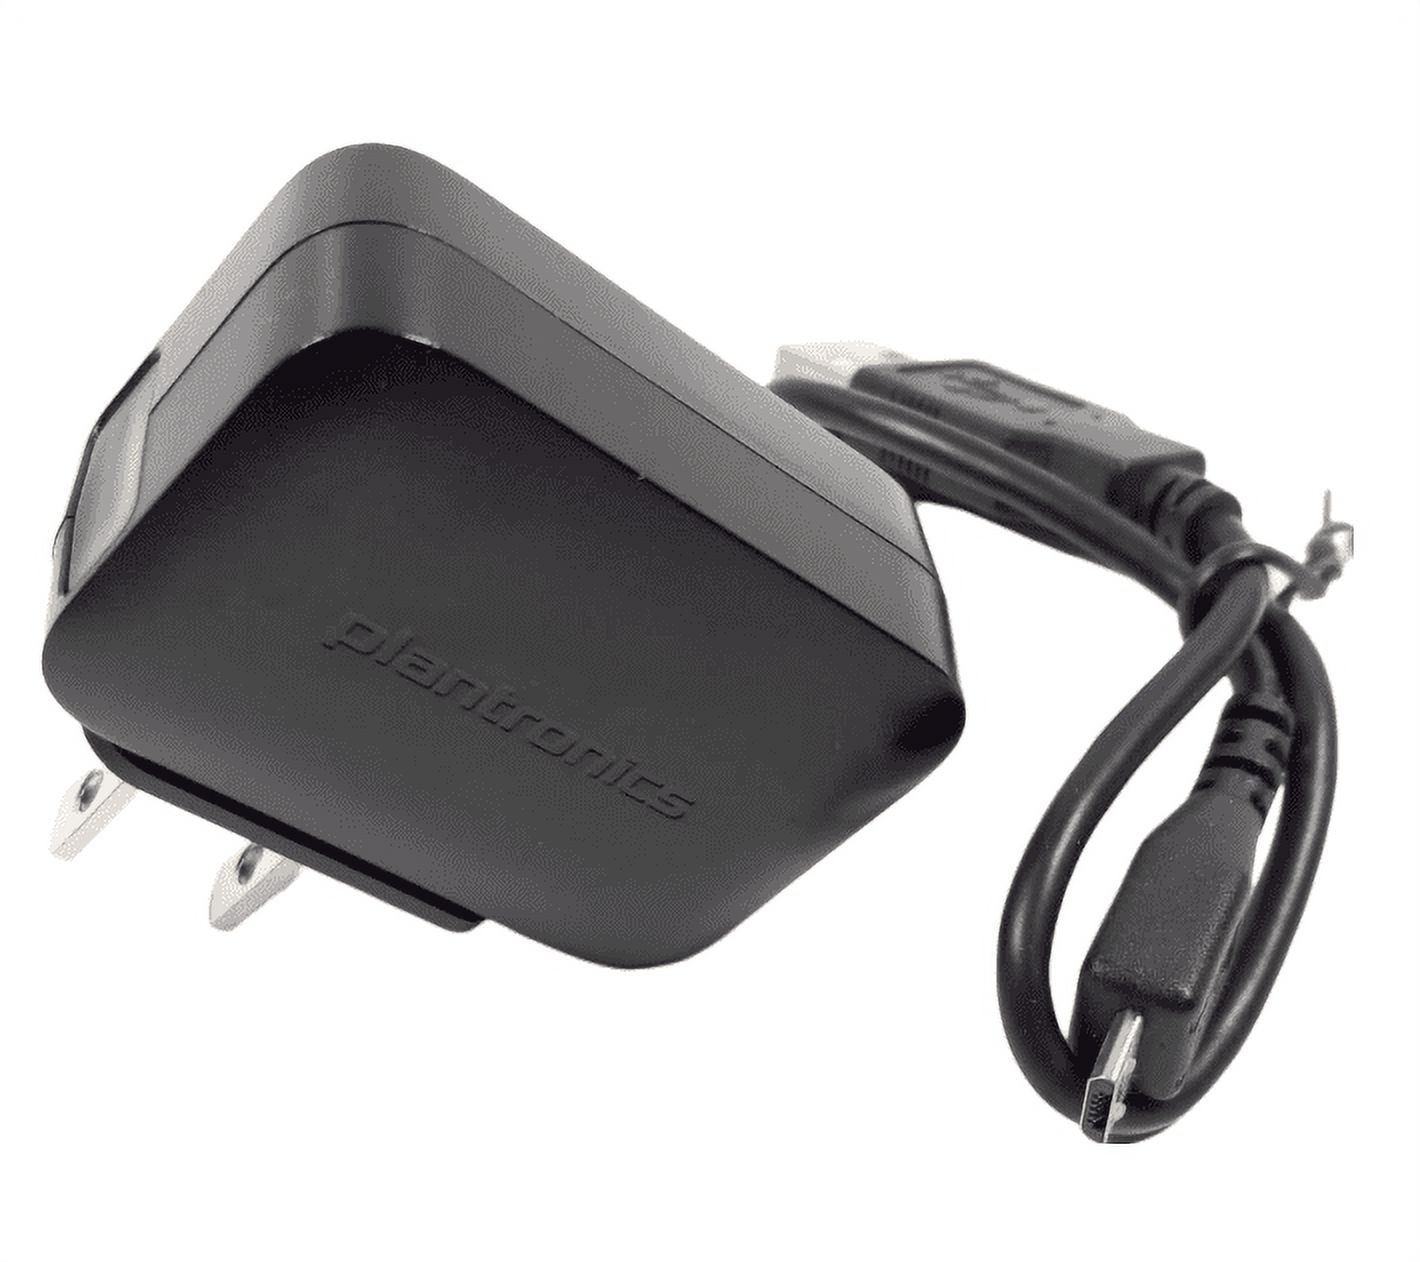 Plantronics SSC-4W5 050075 5.0V 750mA AC Power Adapter Charger 200733-01 - image 1 of 5